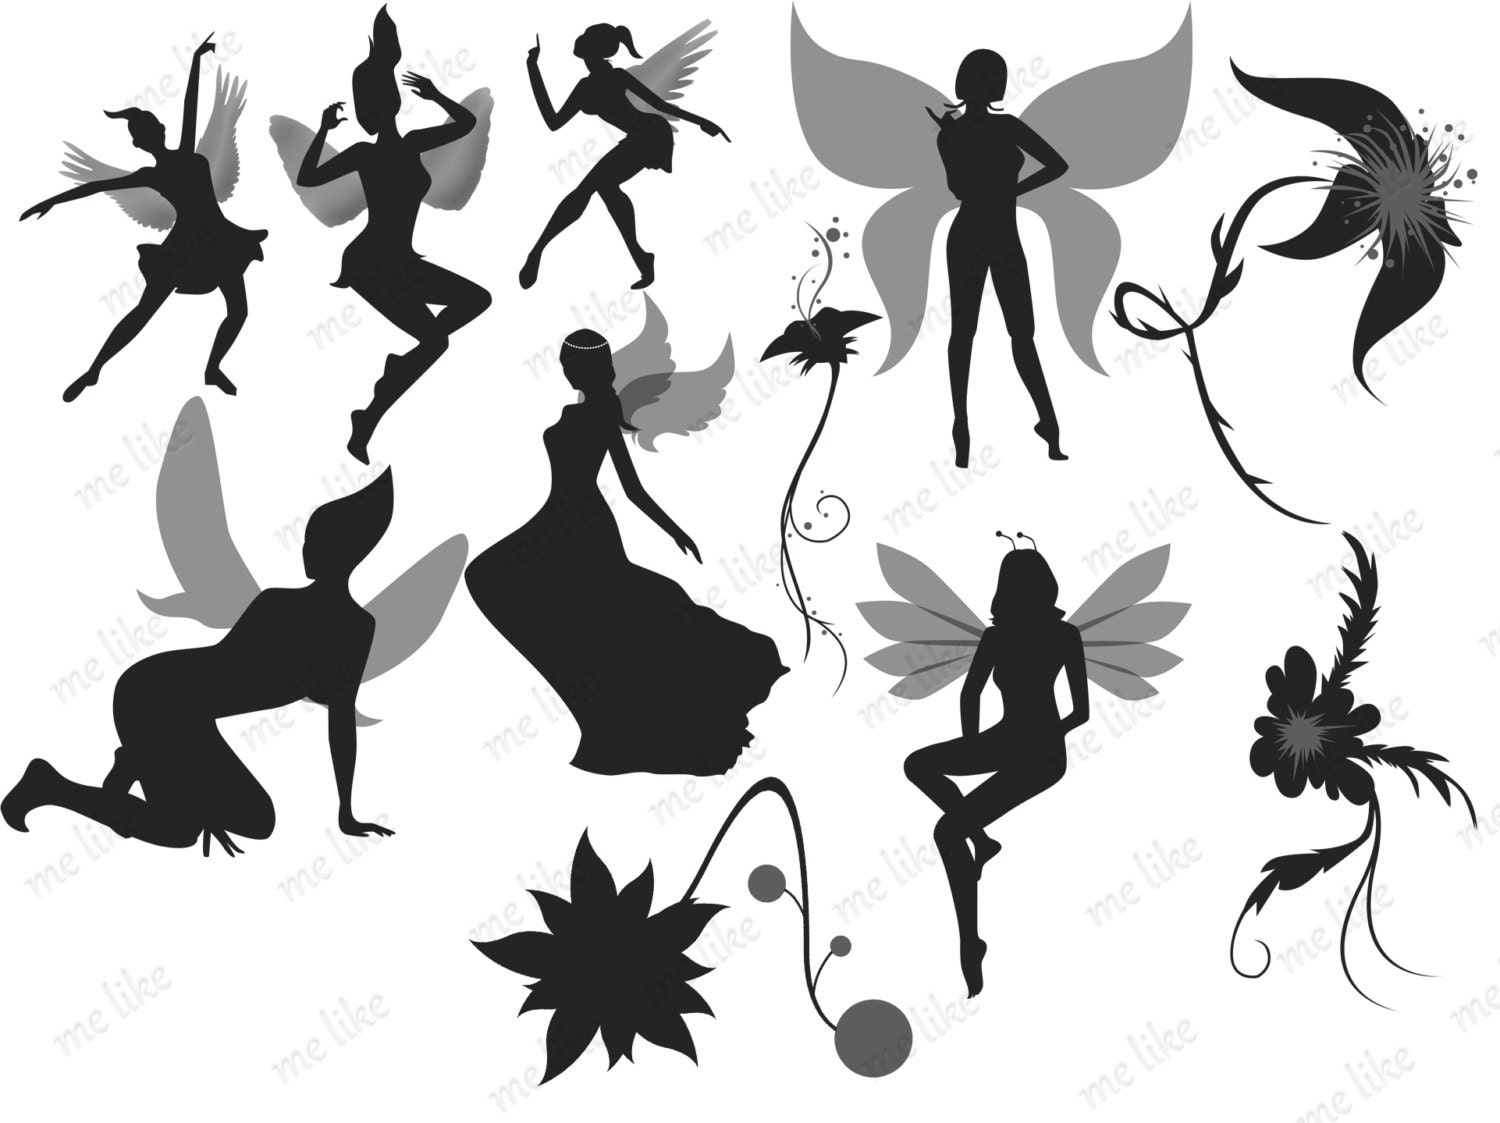 Download Fairies Silhouettes Clip Art-INSTANT DOWNLOAD -11 ...